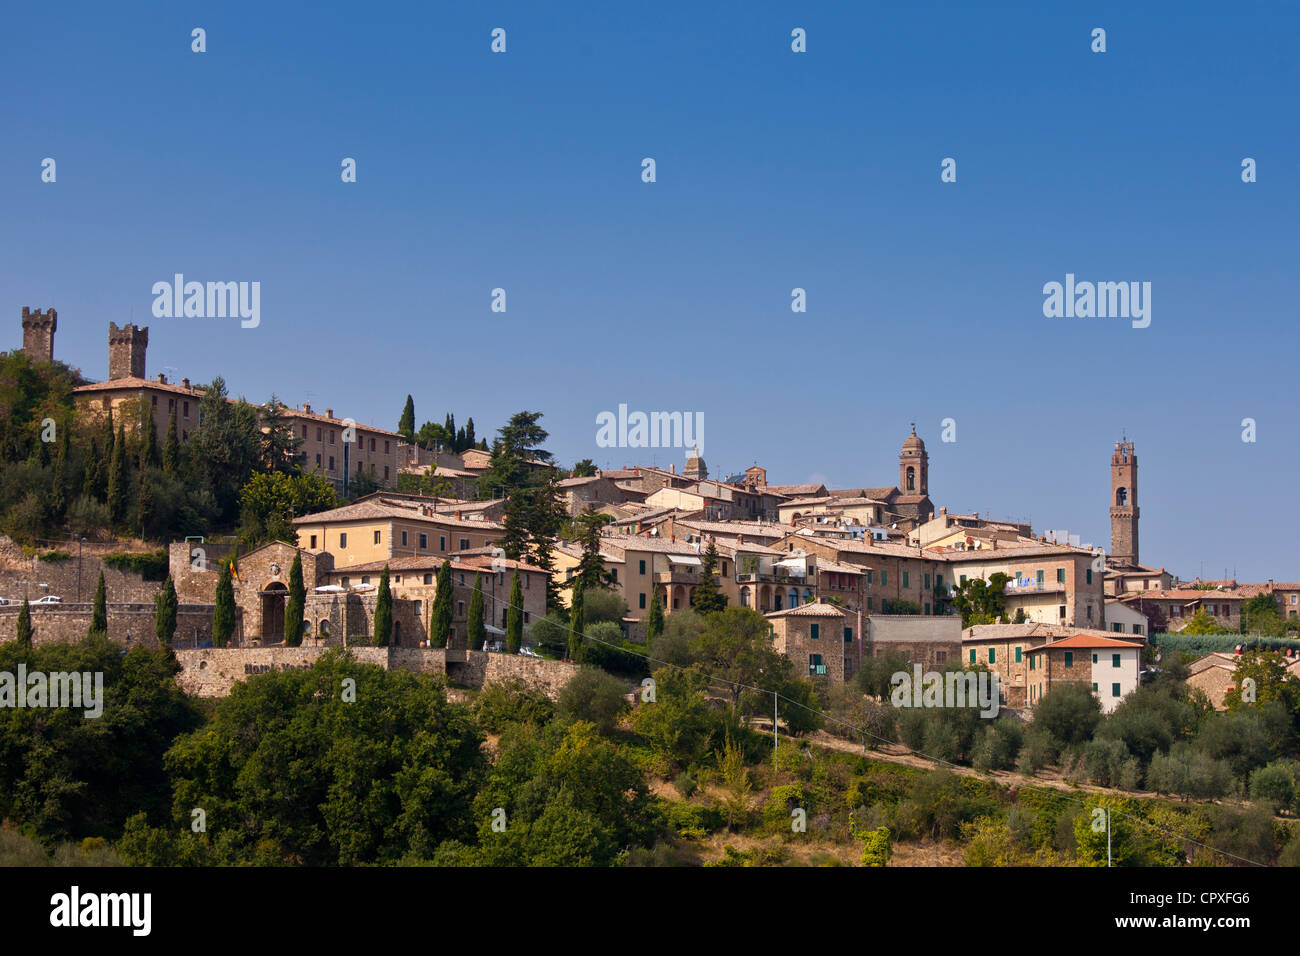 Ancient Tuscan architecture of hill town of Montalcino in Val D'Orcia, Tuscany, Italy Stock Photo